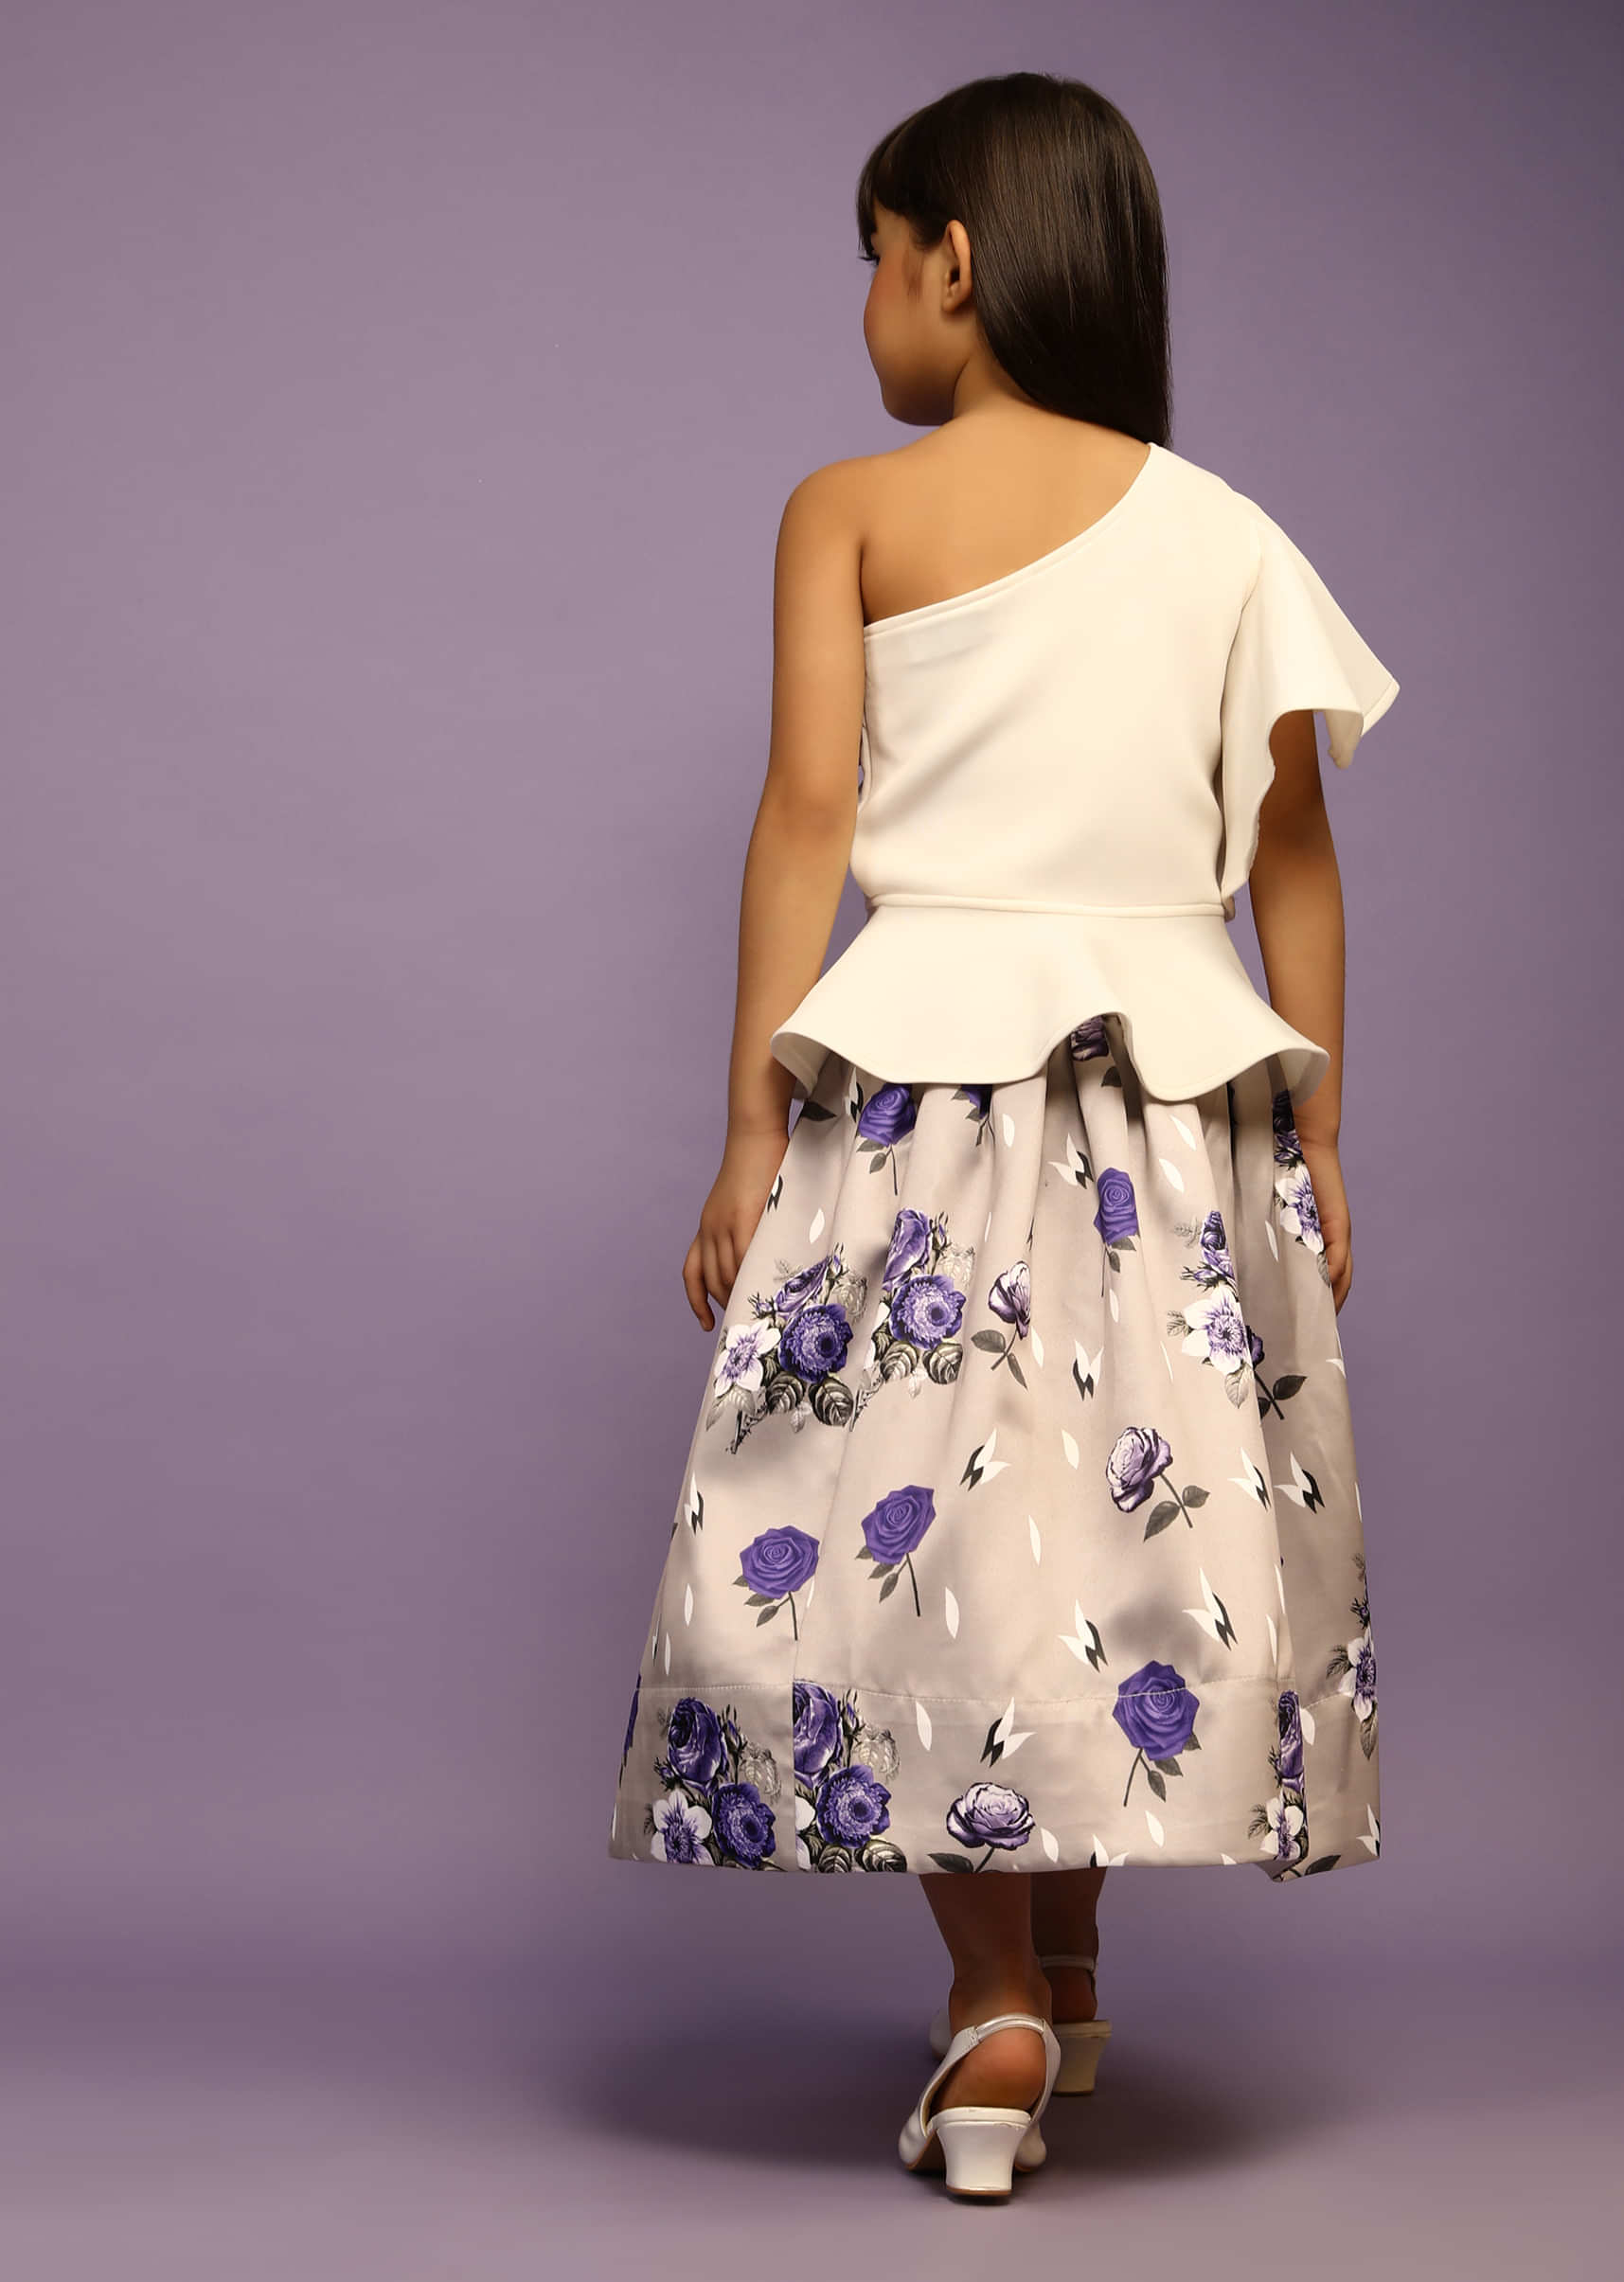 Kalki Girls White Peplum Top With One Shoulder Ruffle Sleeves And Grey Floral Printed Skirt  